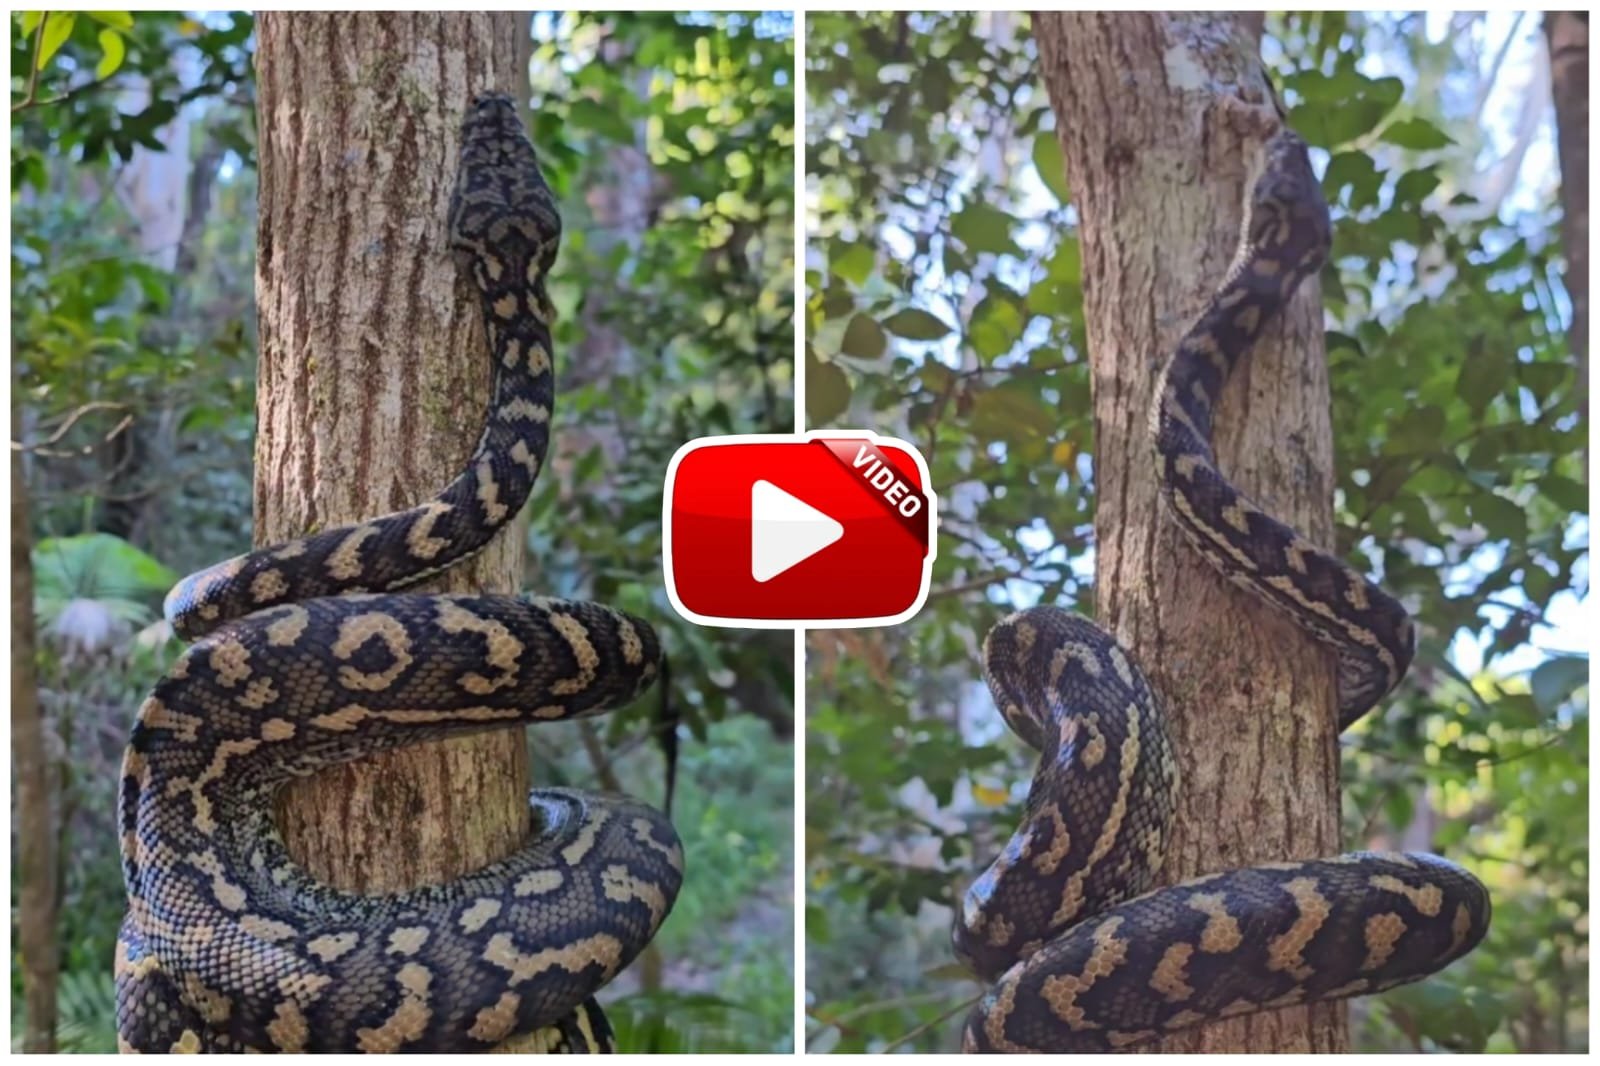 python video Giant snake seen climbing tree in search of prey